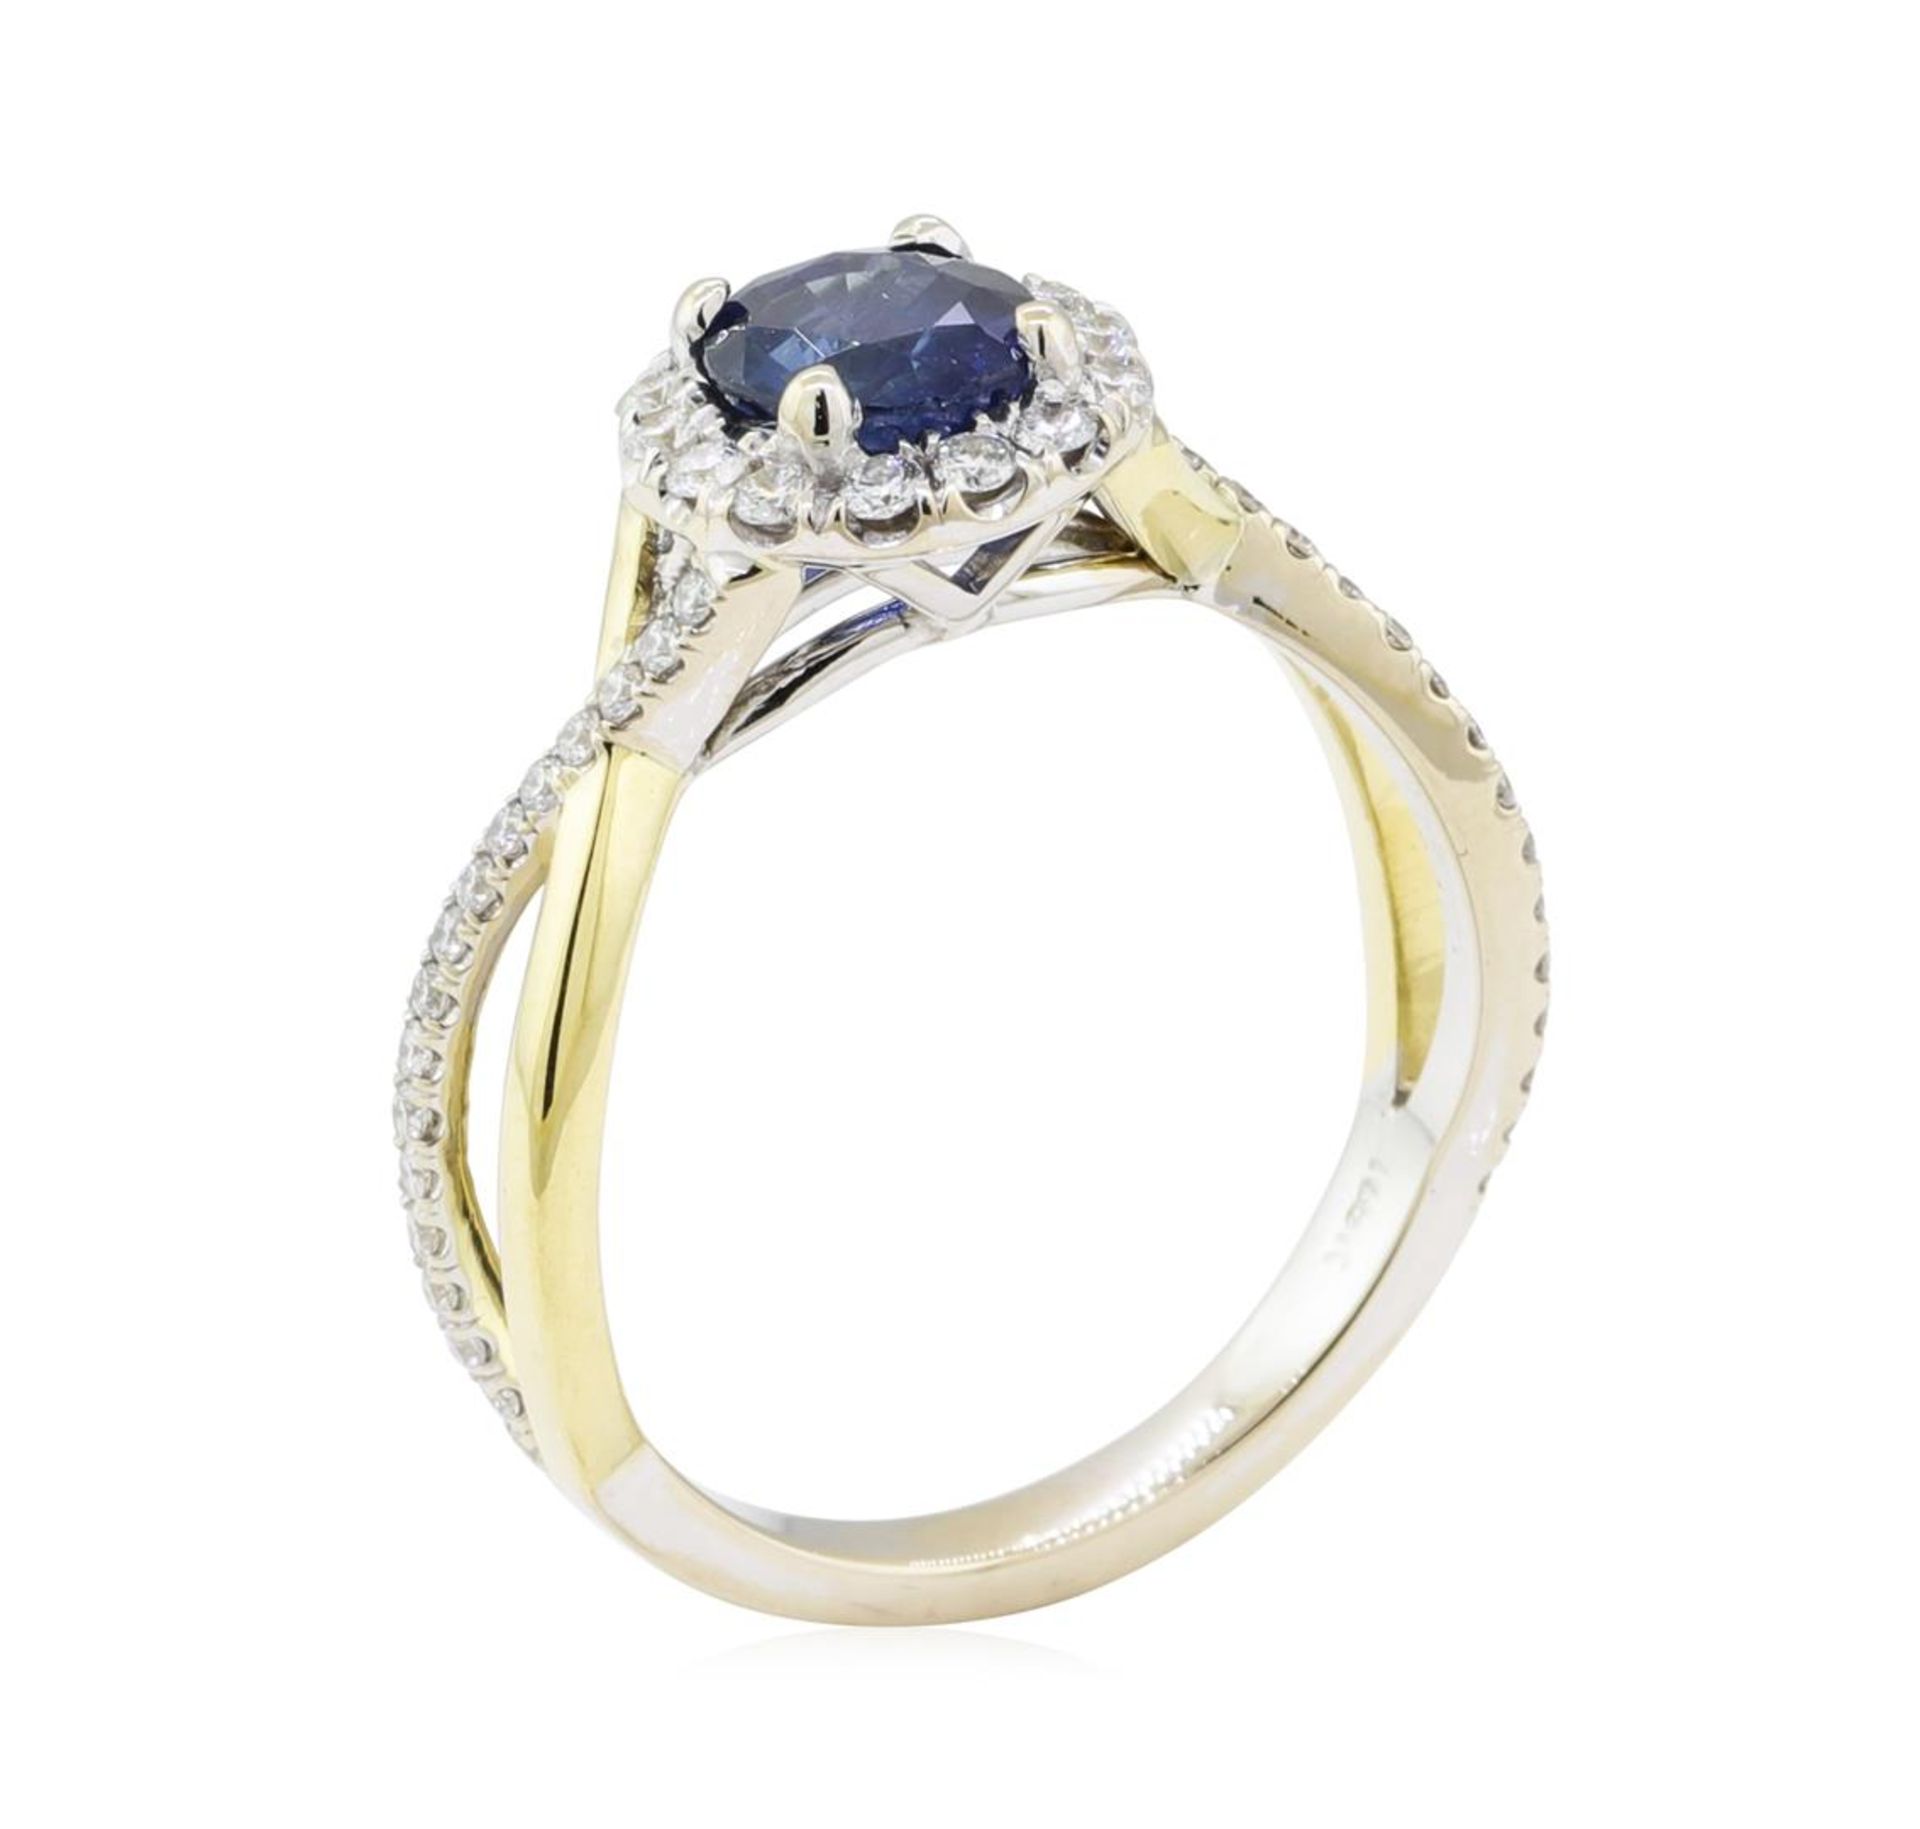 1.77 ctw Sapphire and Diamond Ring - 18KT White Gold - Image 4 of 5